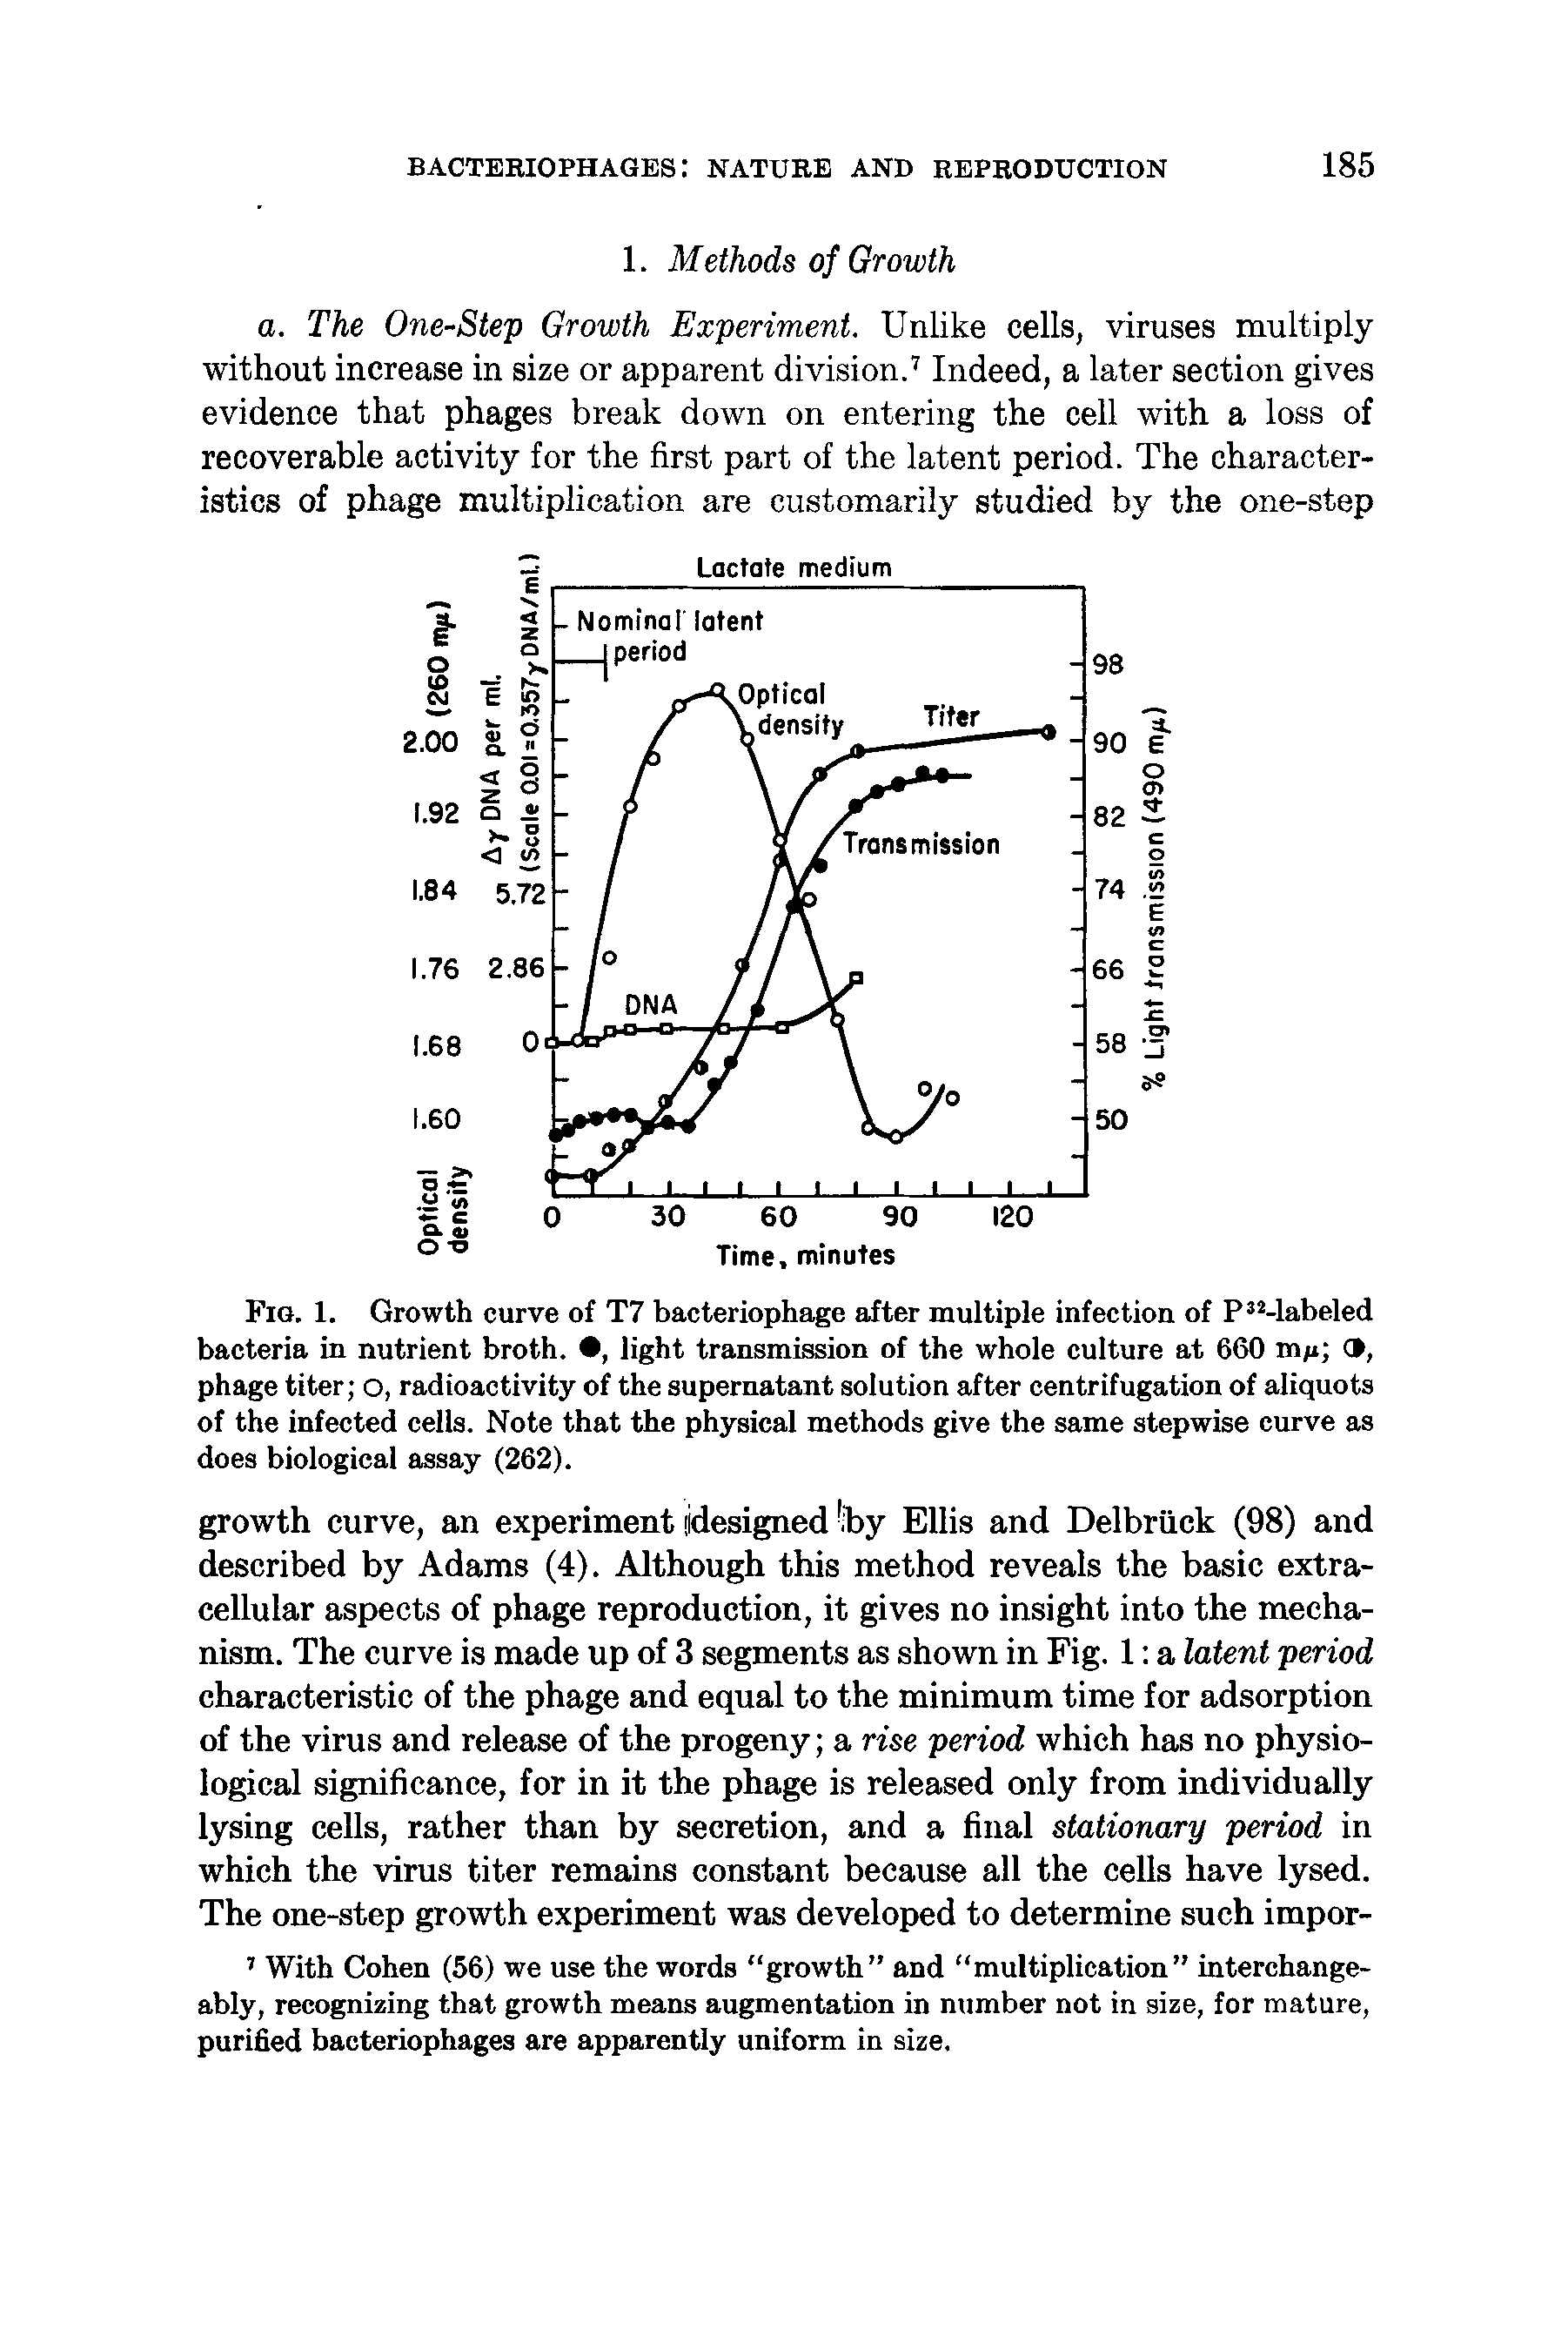 Fig. 1. Growth curve of T7 bacteriophage after multiple infection of P Mabeled bacteria in nutrient broth. , light transmission of the whole culture at 660 m , phage titer o, radioactivity of the supernatant solution after centrifugation of aliquots of the infected cells. Note that the physical methods give the same stepwise curve as does biological assay (262).